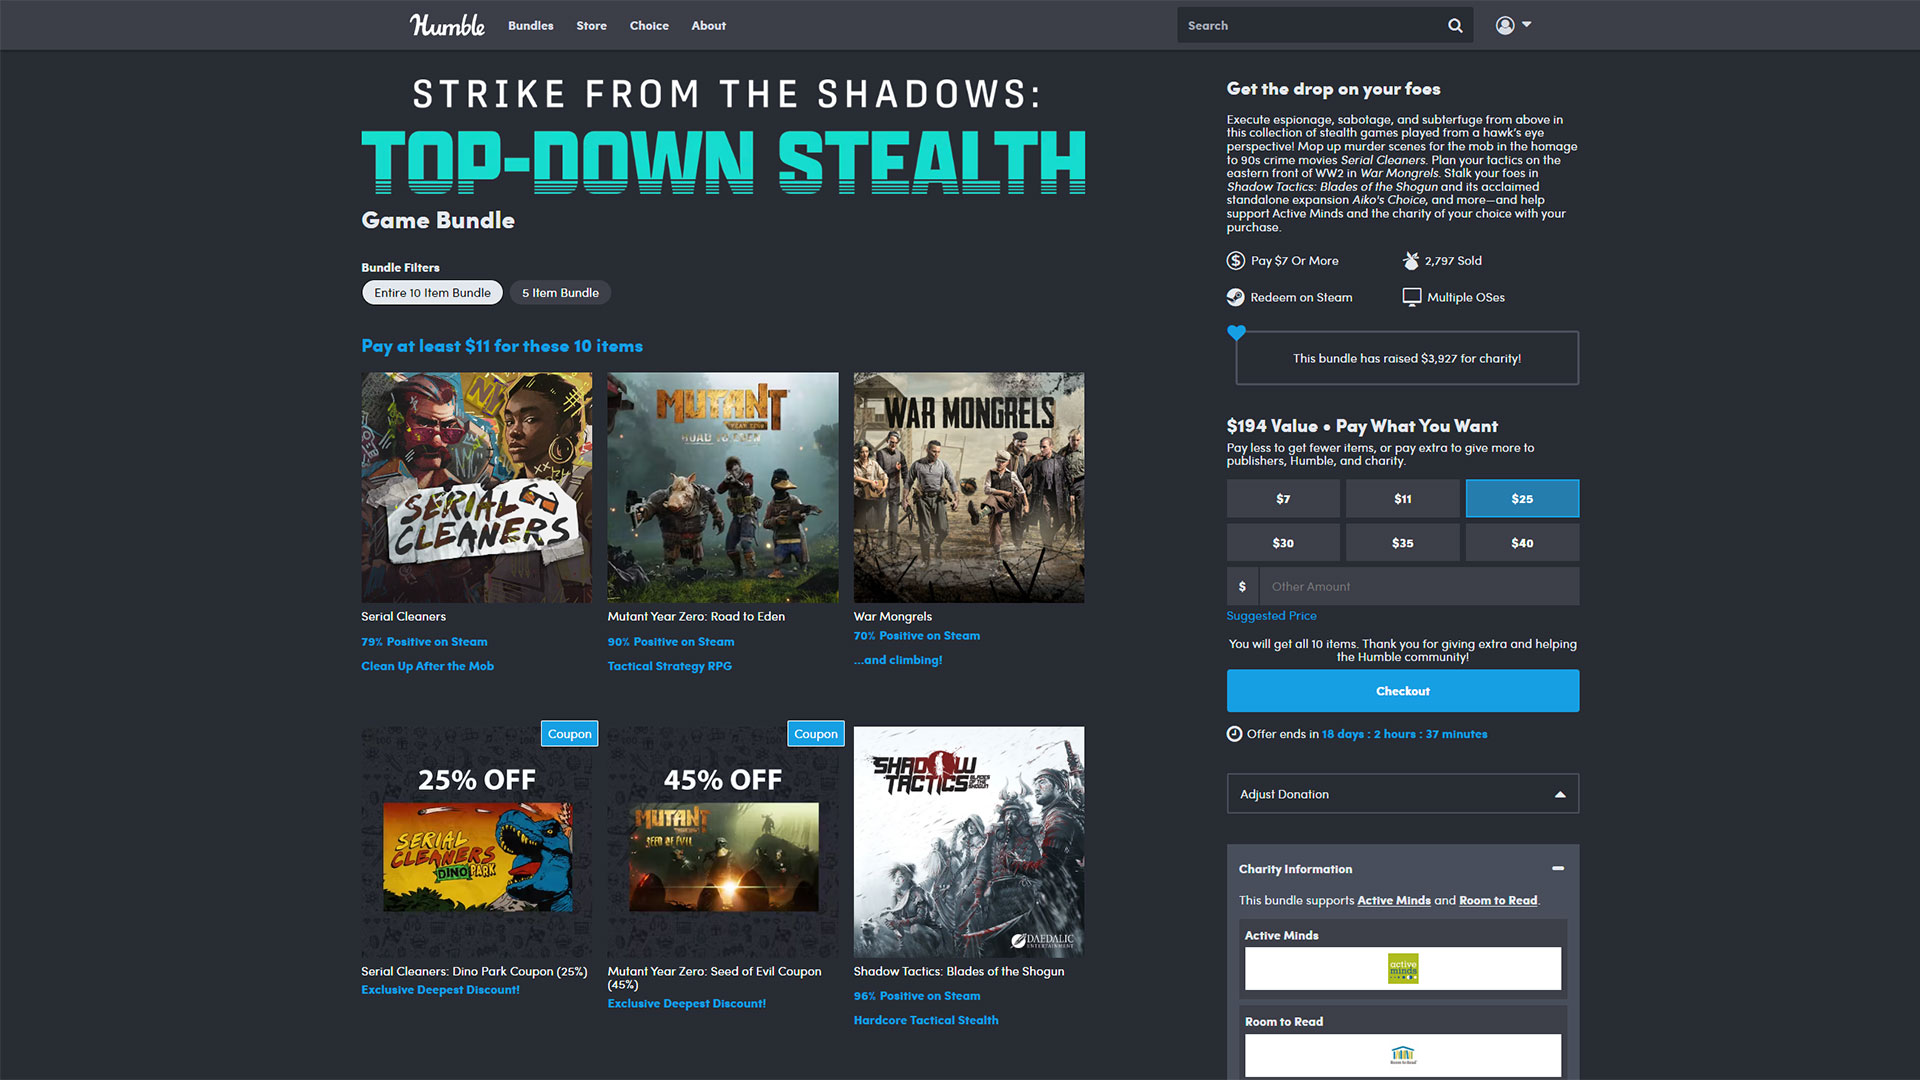 The Strike from the Shadows: Top-Down Stealth bundle is now live at Humble